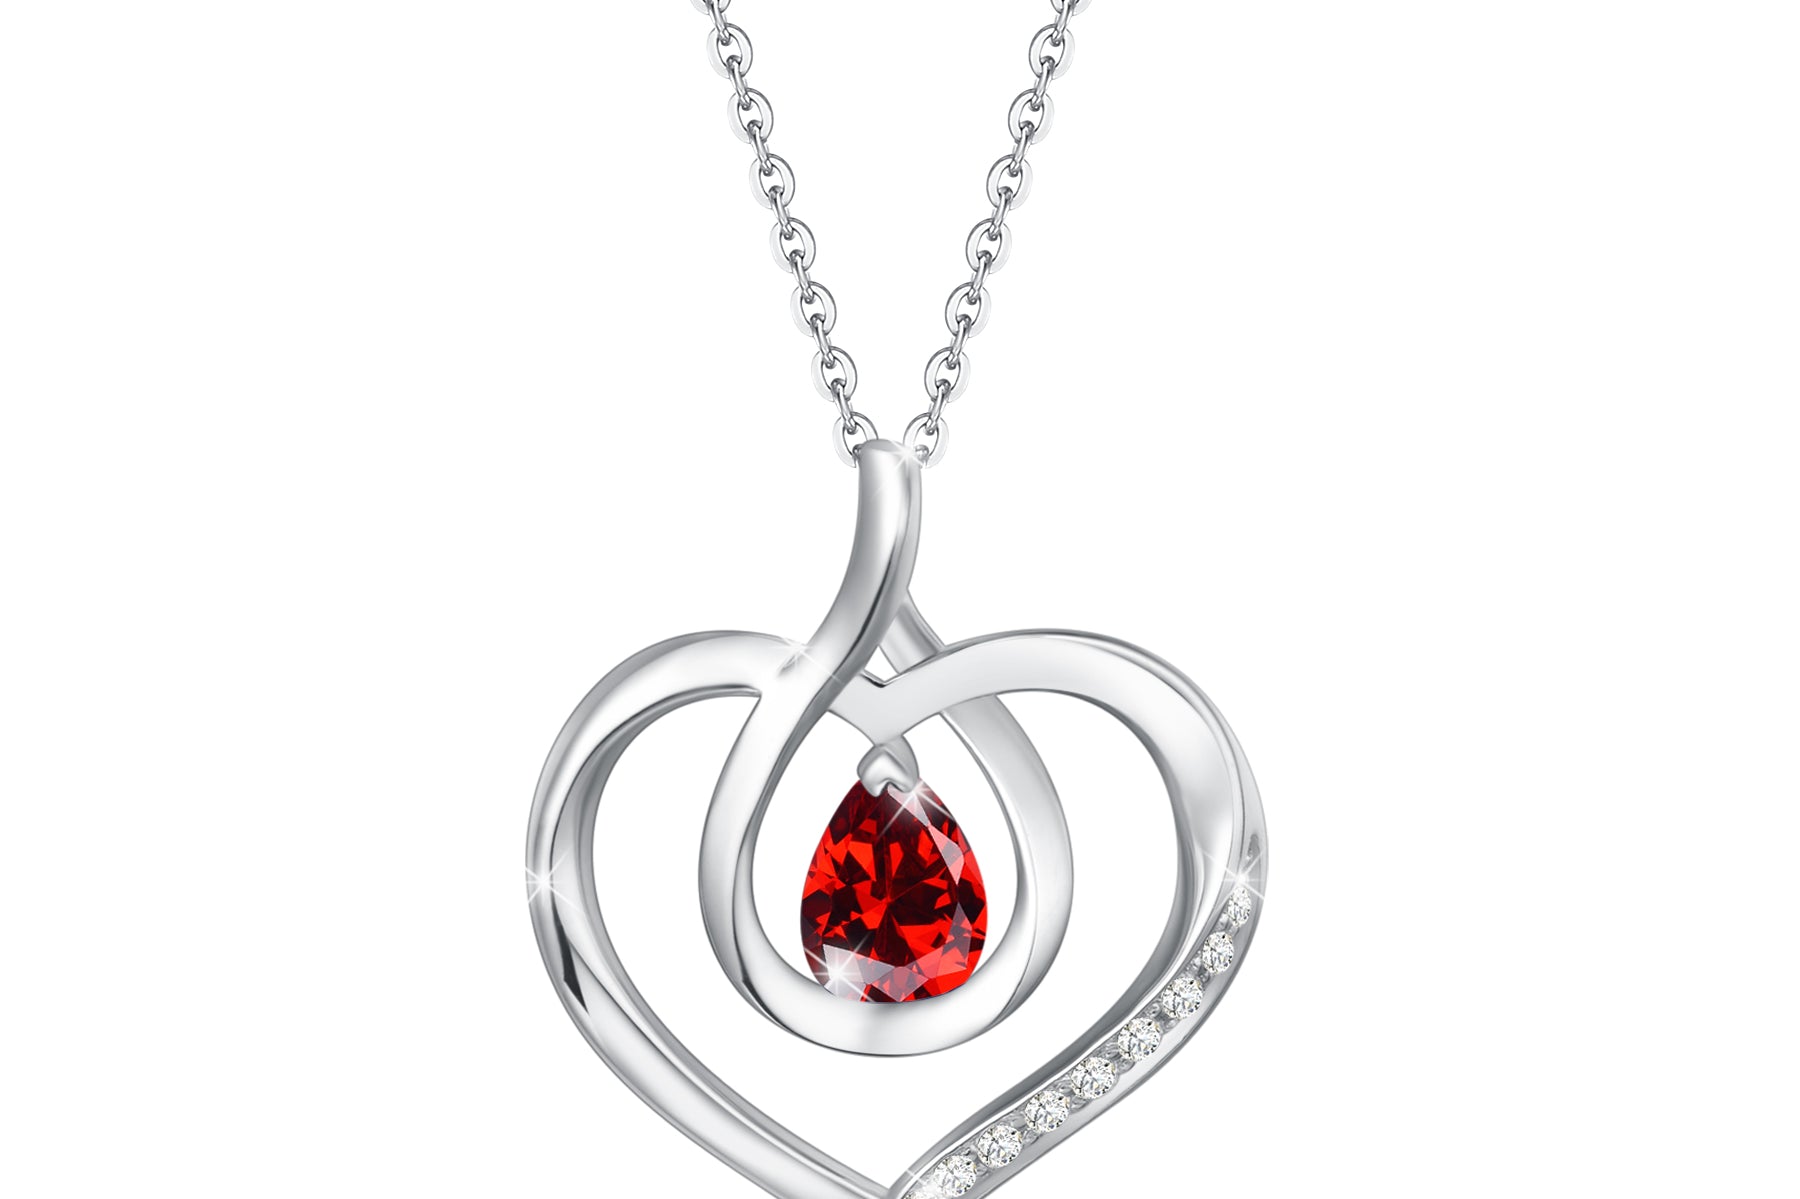 Agvana Forever Love Birthstone Created Gemstone Sterling Silver Necklace